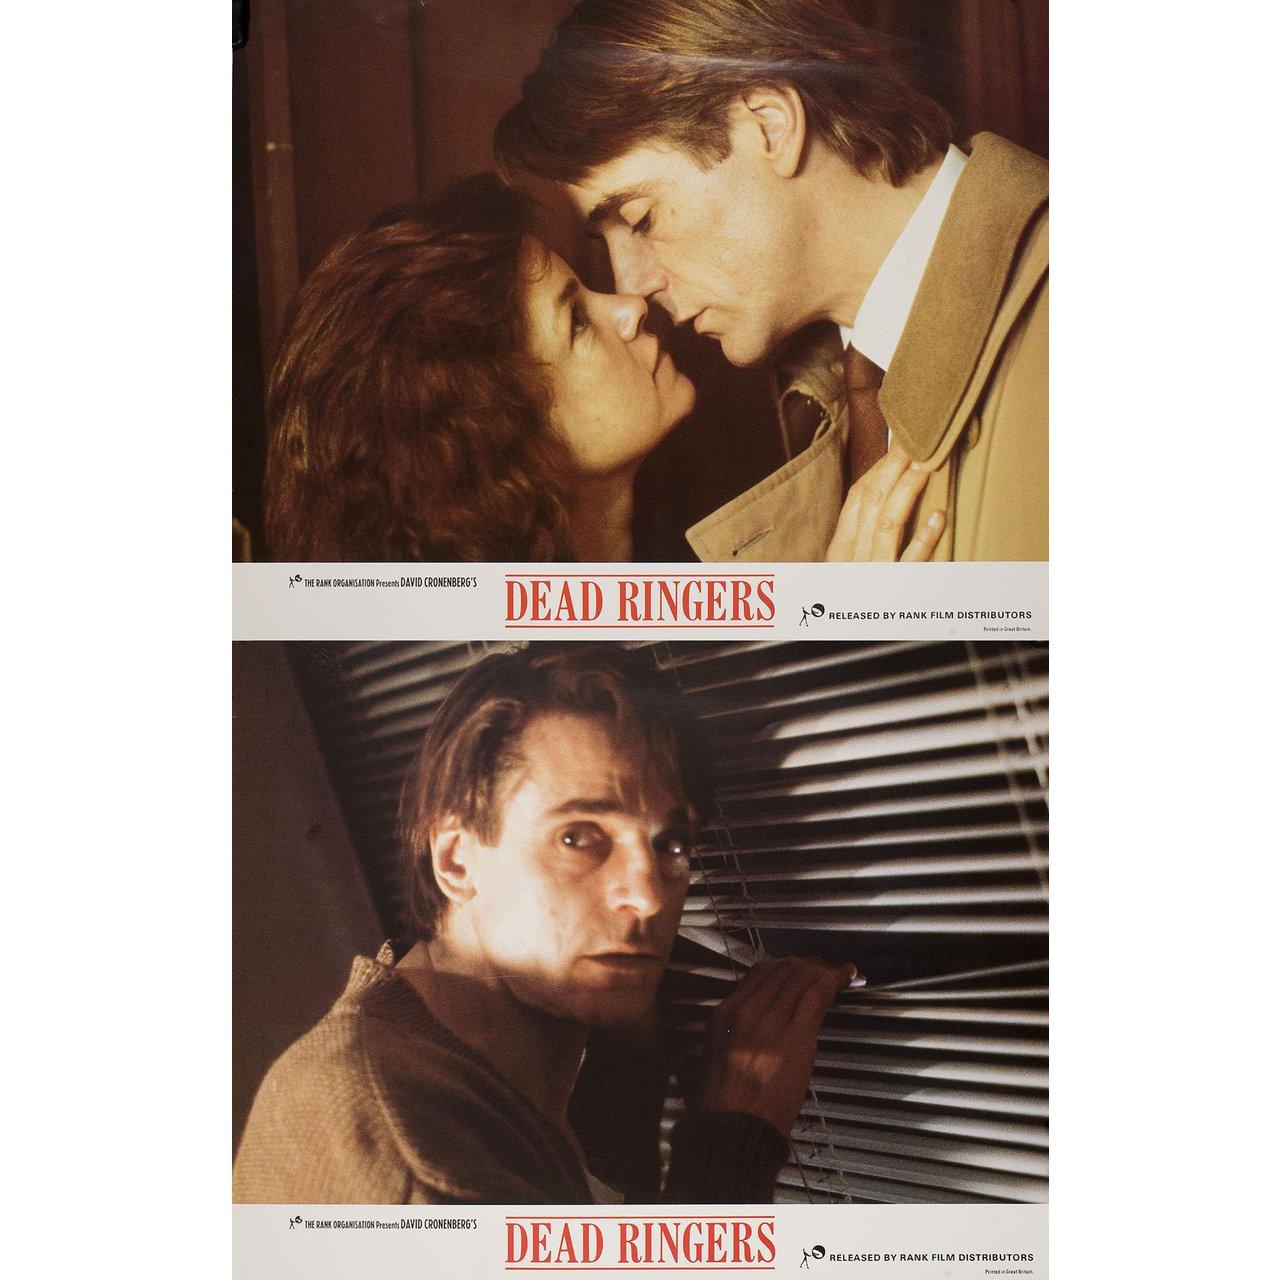 Original 1988 British lobby card set for the film Dead Ringers directed by David Cronenberg with Jeremy Irons / Genevieve Bujold / Heidi von Palleske / Barbara Gordon. Fine condition. Please note: the size is stated in inches and the actual size can